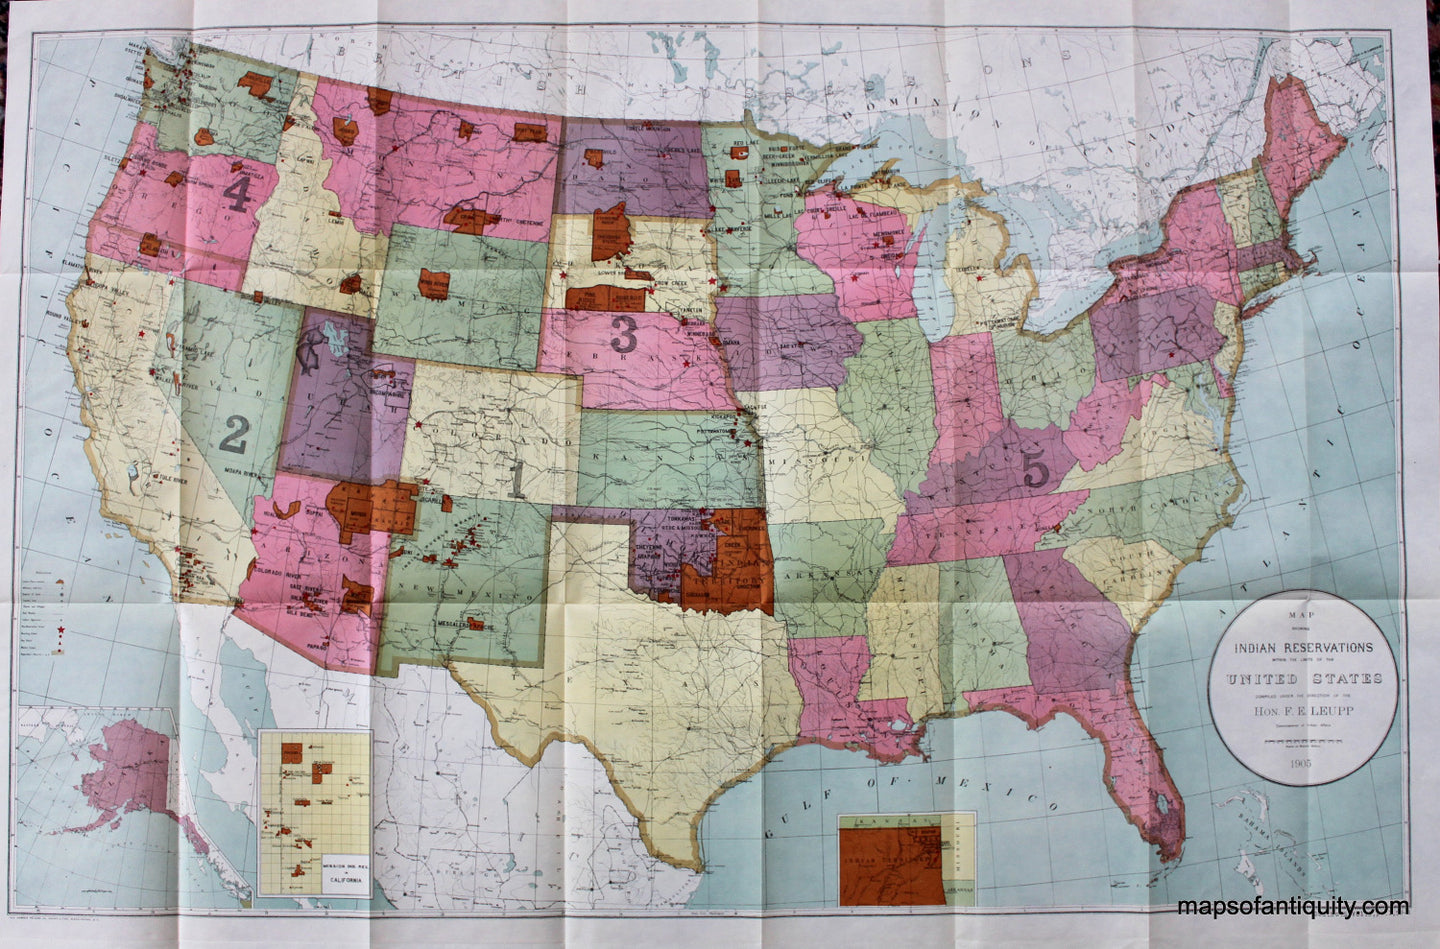 Antique-Folded-Map-Printed-Color-Map-showing-Indian-Reservations-within-the-Limits-of-the-United-States-United-States--1905-U.S.-Bureau-of-Indian-Affairs-Maps-Of-Antiquity